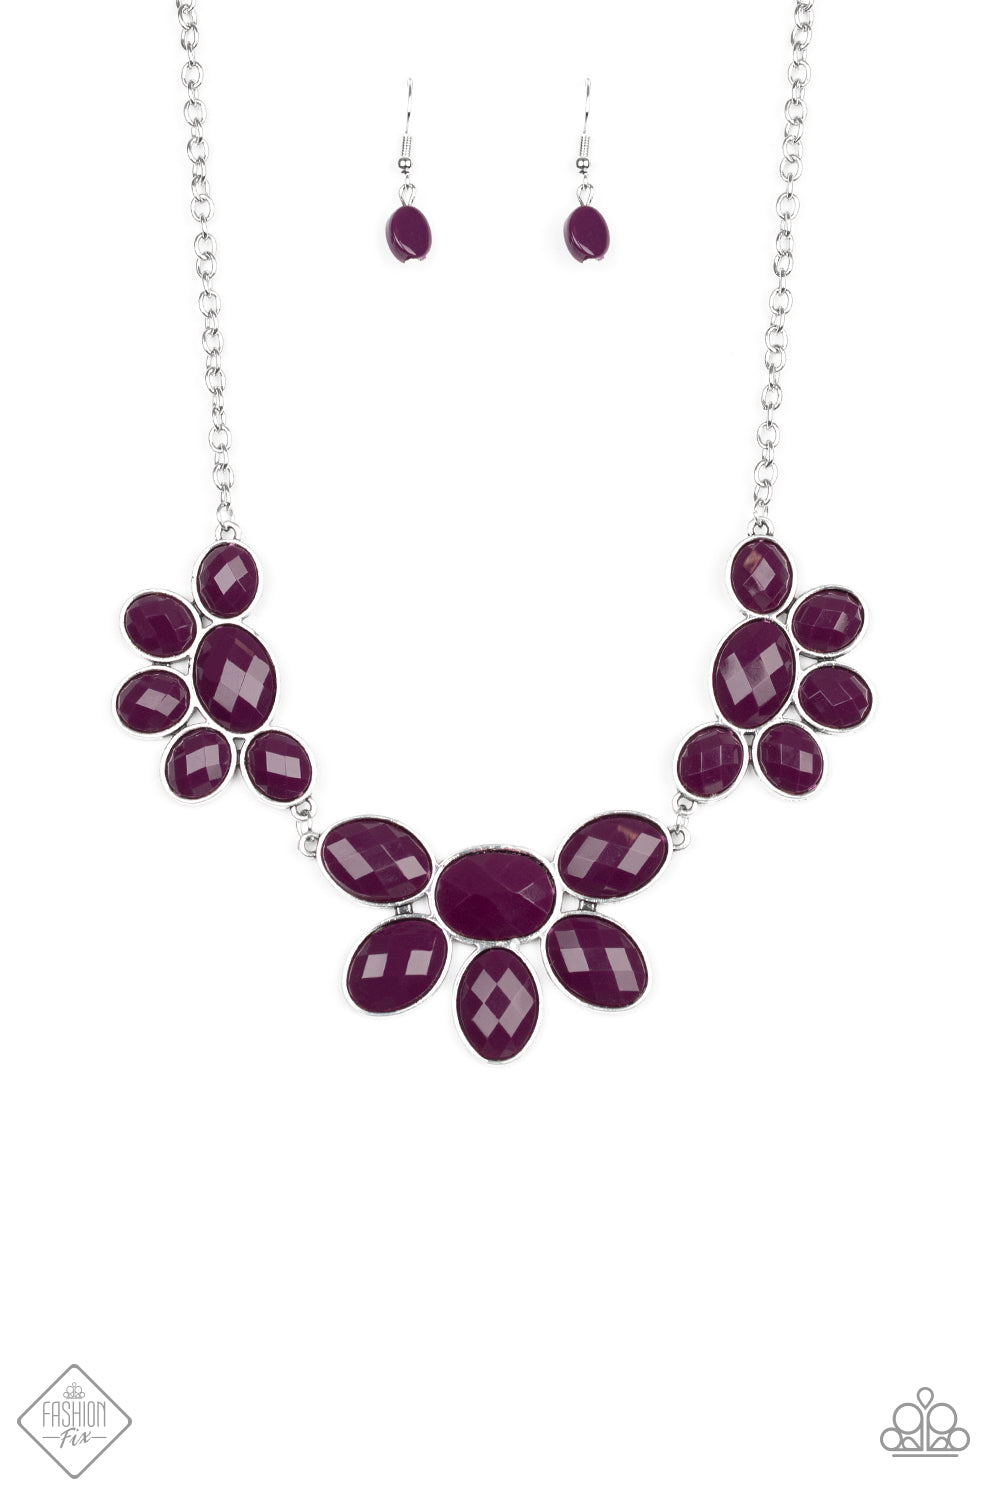 Flair Affair Fashion Fix Purple Necklace January 2020 - TheMasterCollection